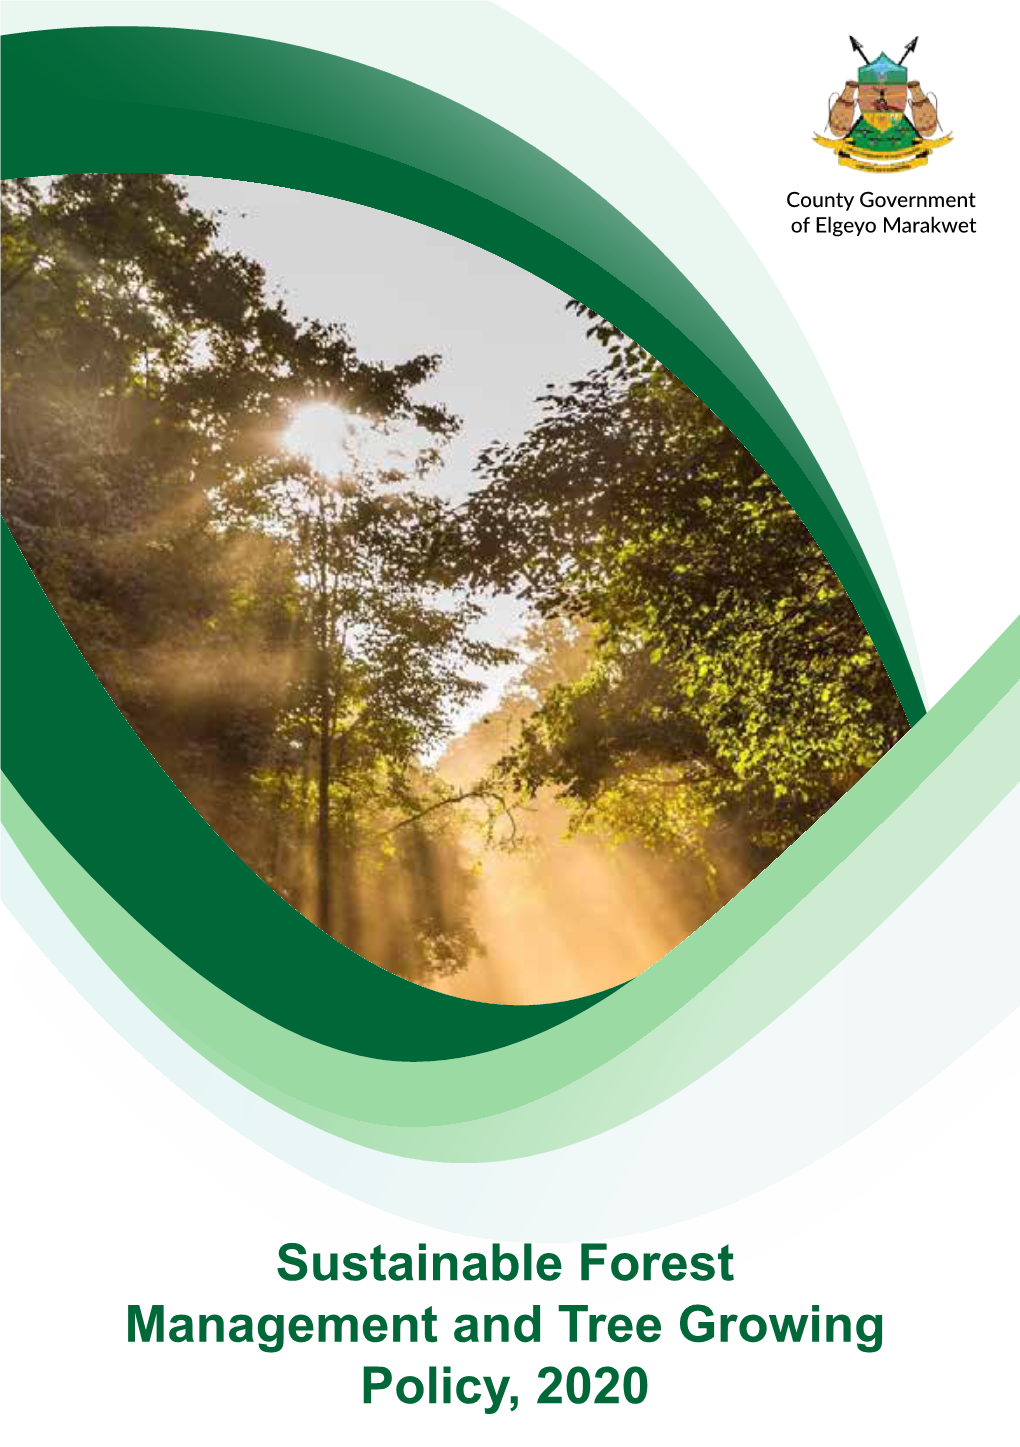 Sustainable Forest Management and Tree Growing Policy, 2020